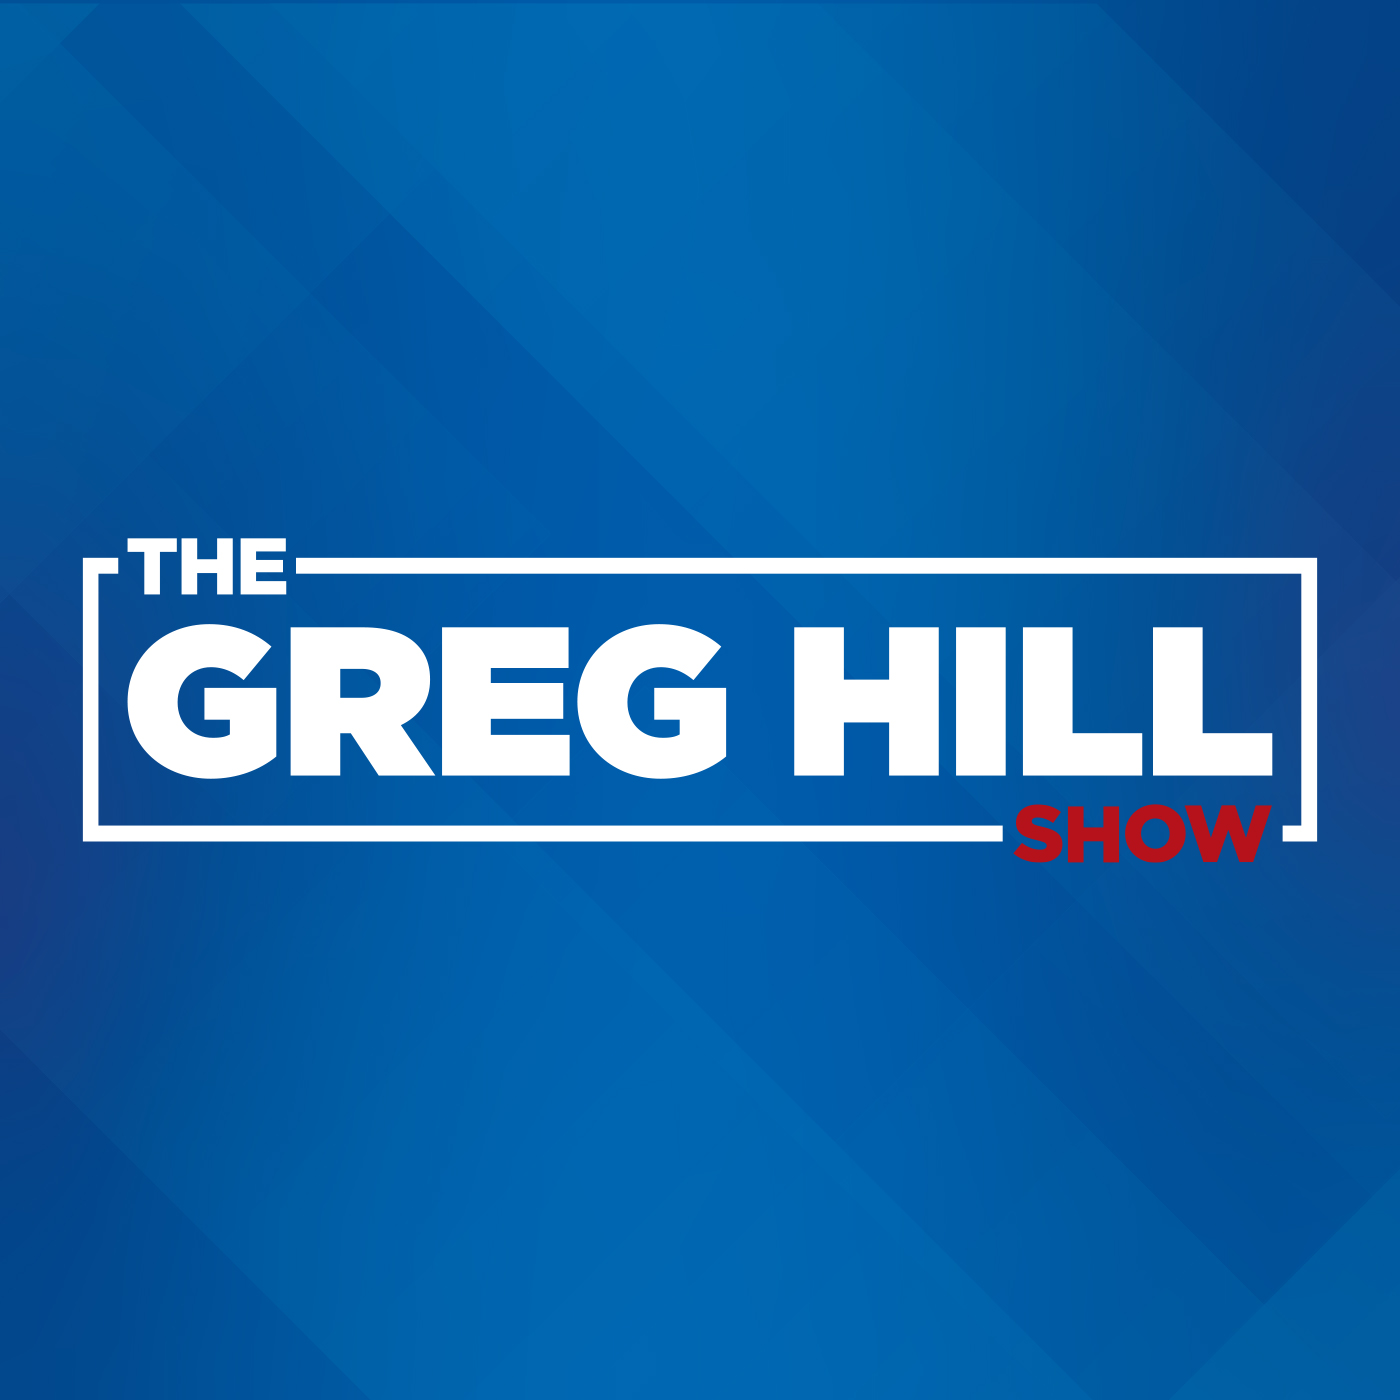 Greg Hill: The 145th most influential Bostonian!